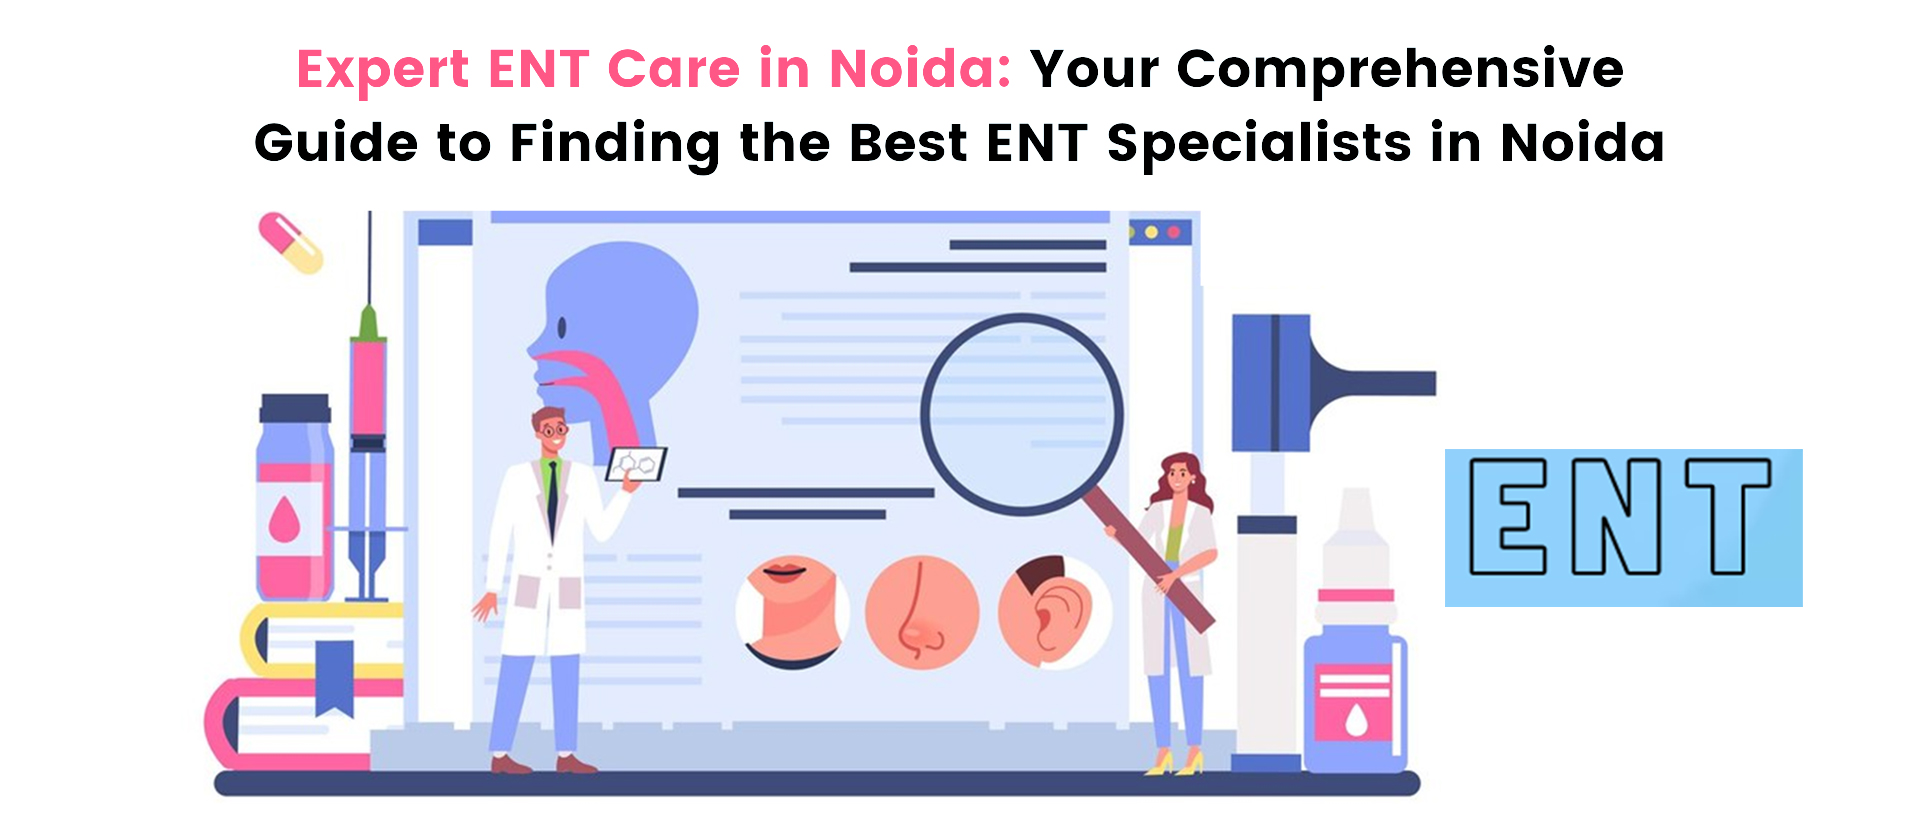 Expert ent care in noida: your comprehensive guide to finding the best ent specialists in noida